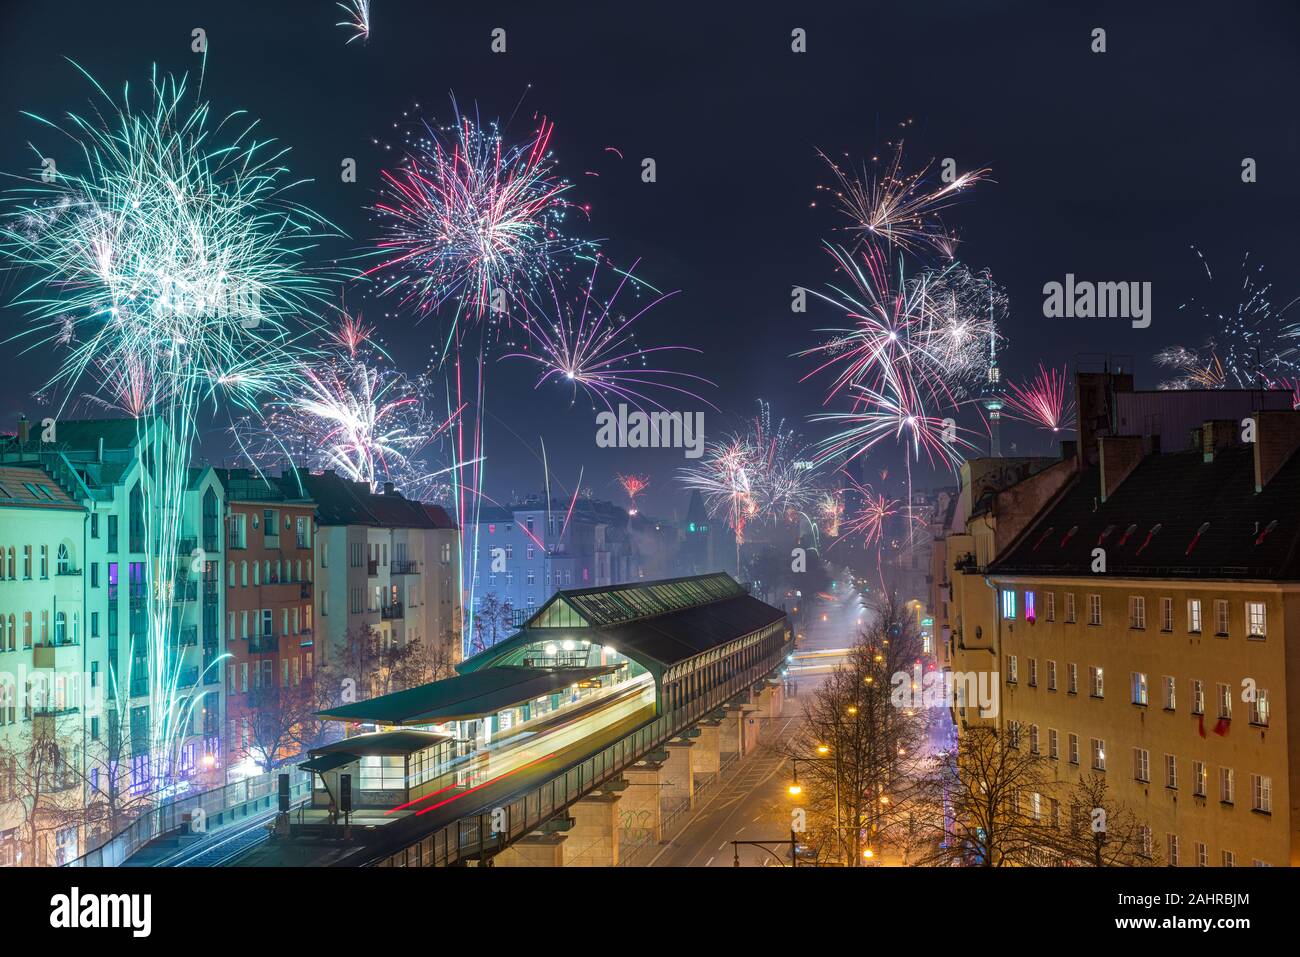 Display of Fireworks in Berlin Mitte on New Year's Eve 2019/20 Stock Photo